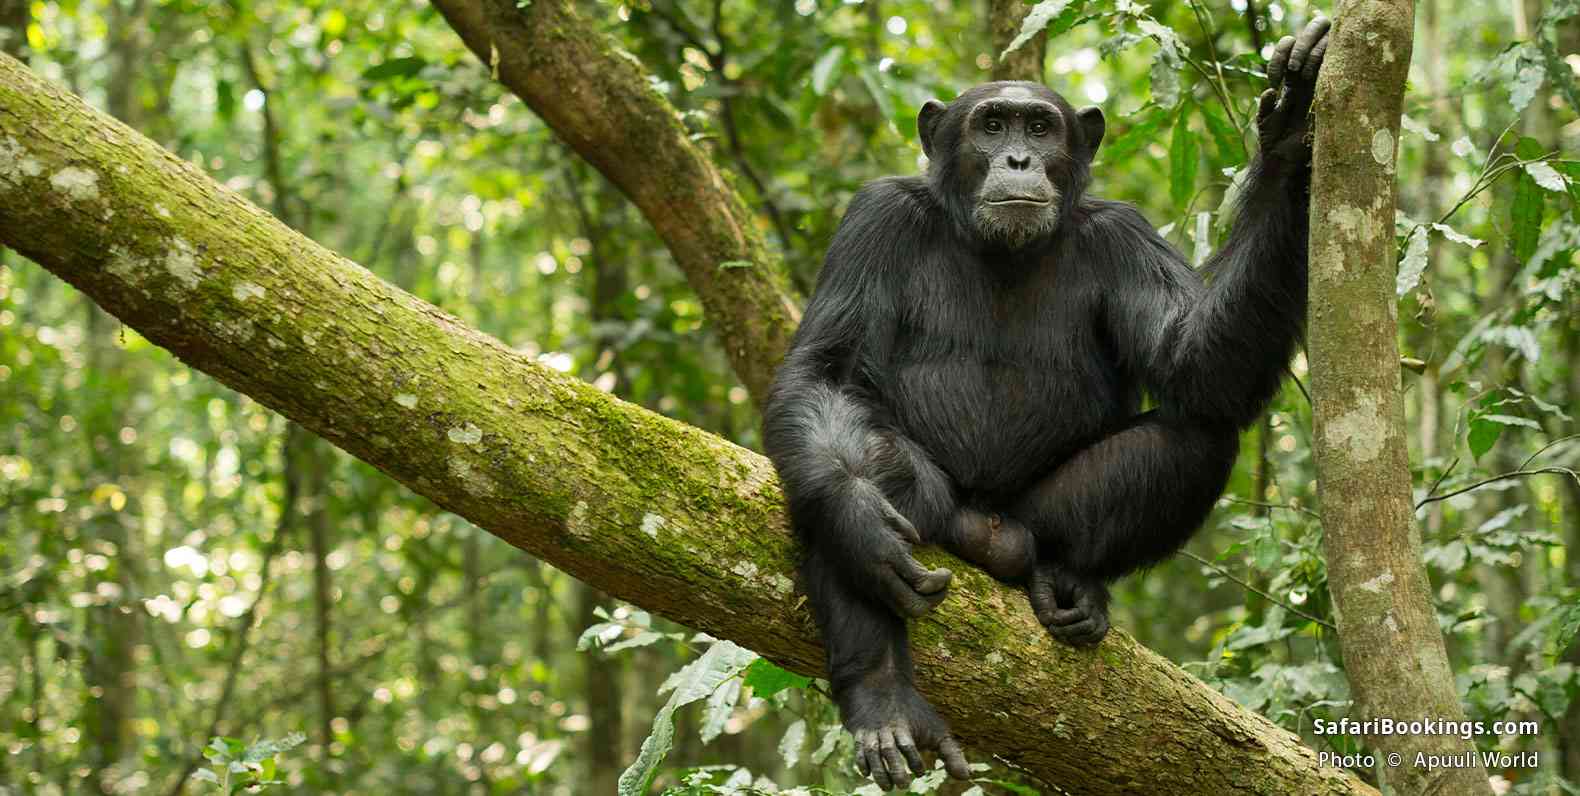 Chimpanzee sitting in a tree in Kibale National Park